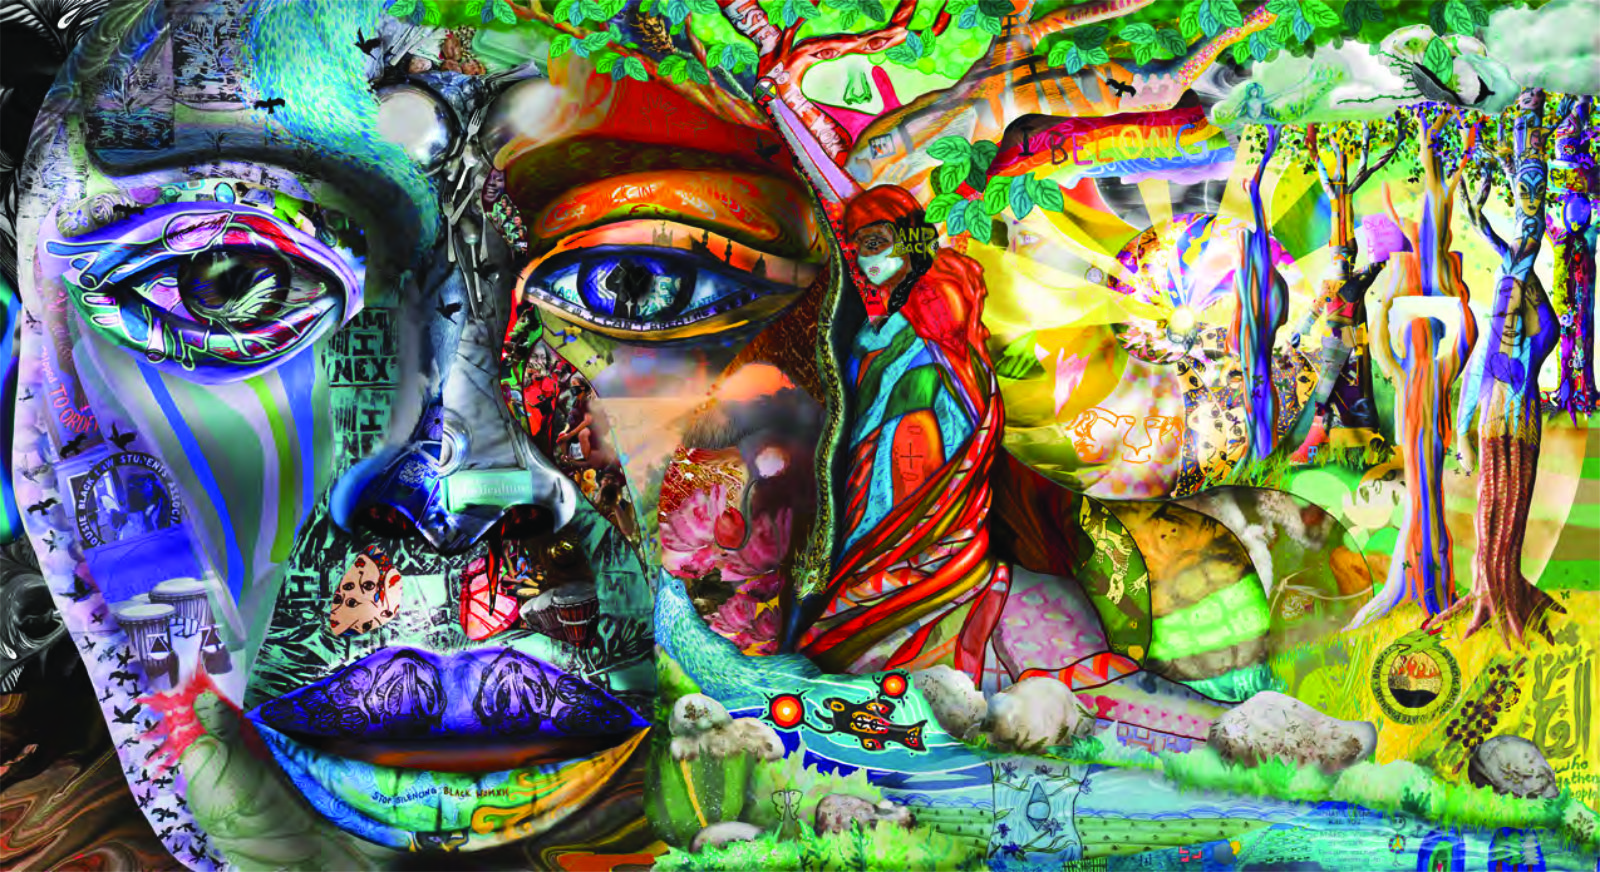 Colour mural with a persons face, emphasis on the eyes and a forest in the back. Words of "I belong" are seen.